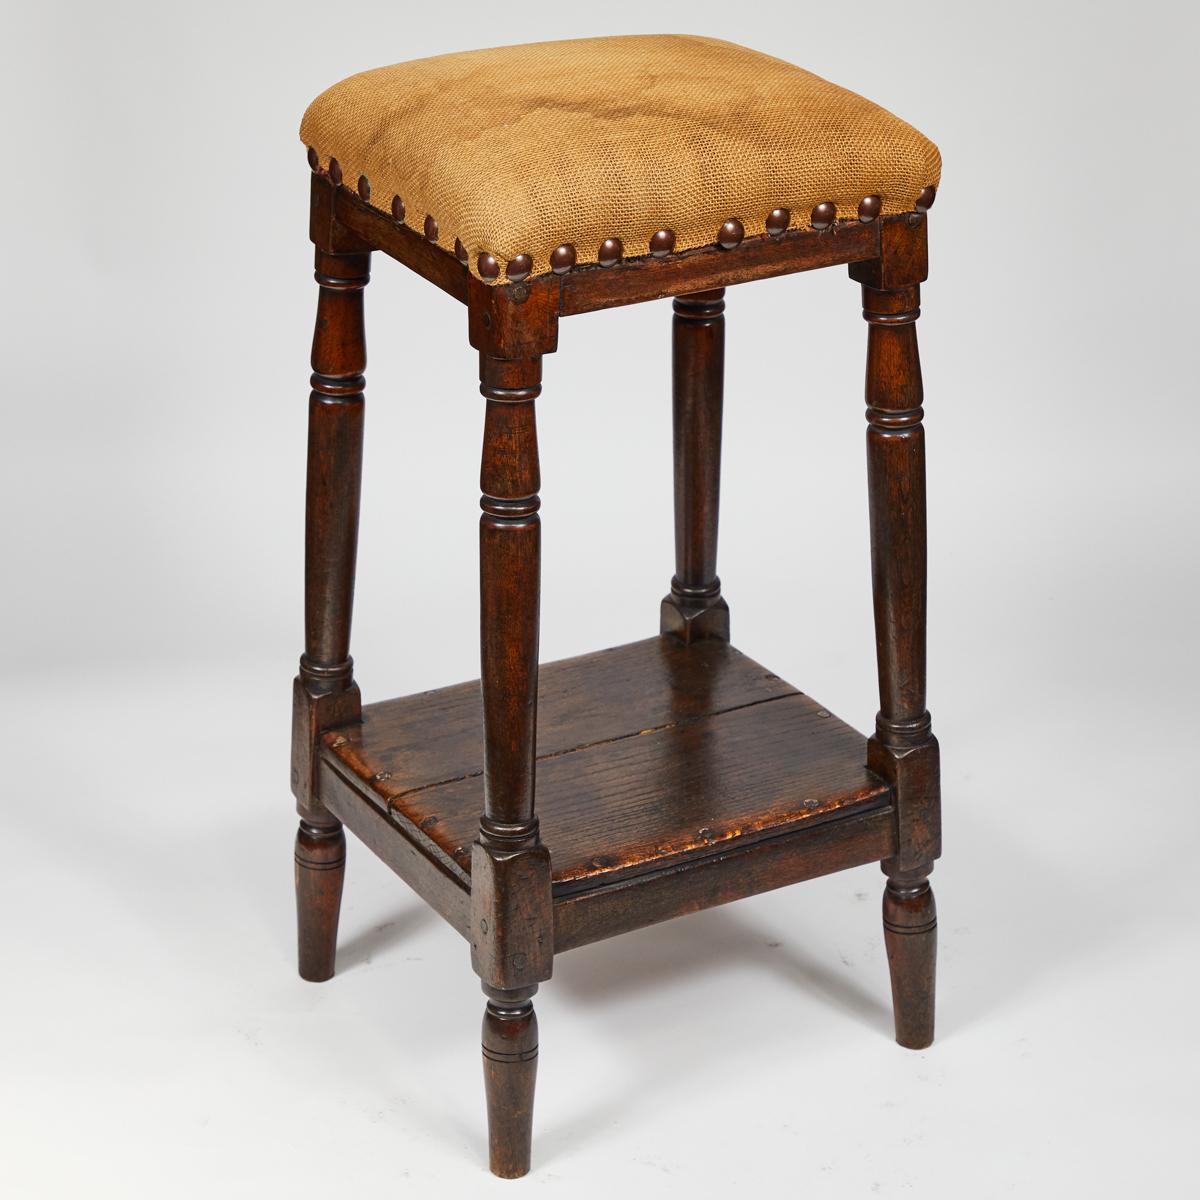 Tall wooden stool from 19th-century England with upholstered seat, brass stud detailing and lower shelf or footrest. The seat has been freshly reupholstered with cream-colored Belgian linen. Charmingly proportioned, this classic stool adds a